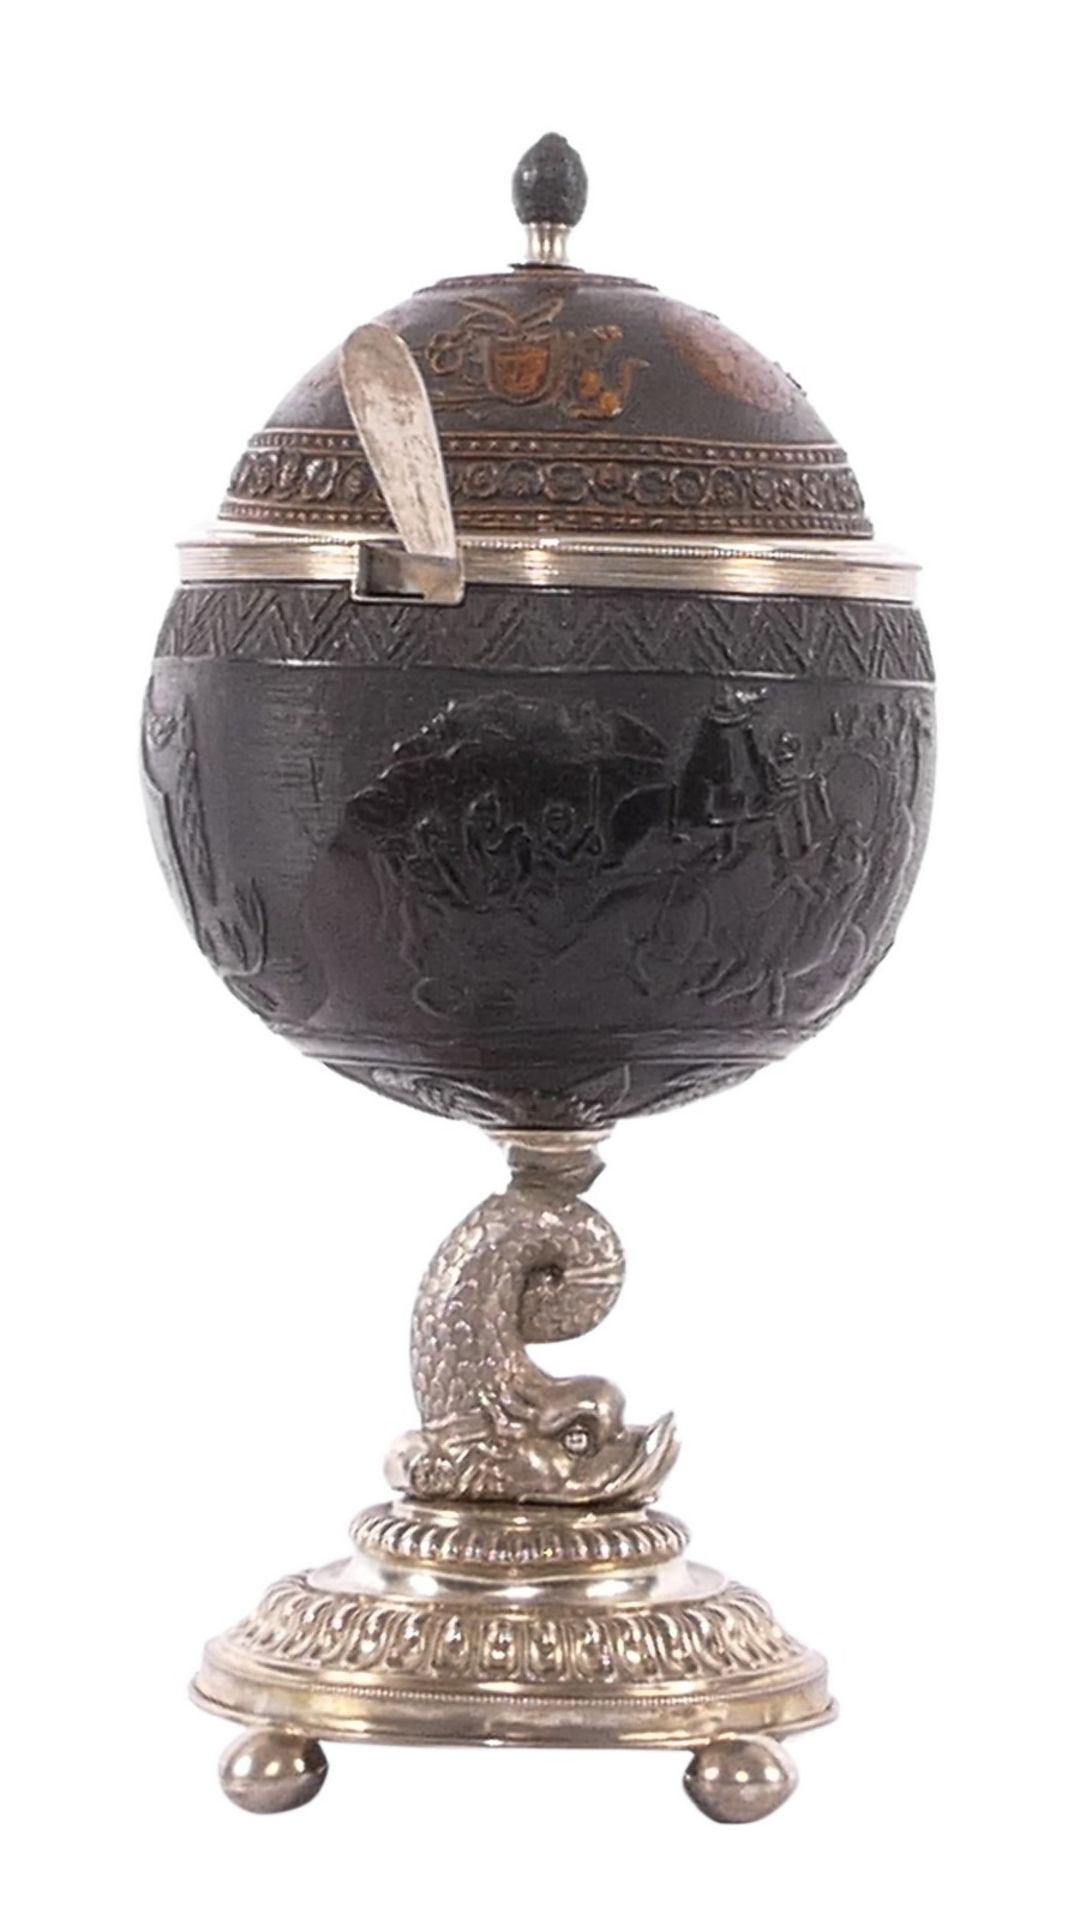 Coconut cup, basso relievo decorated with mythological scenes, owners monogram DM, with a neobaroque